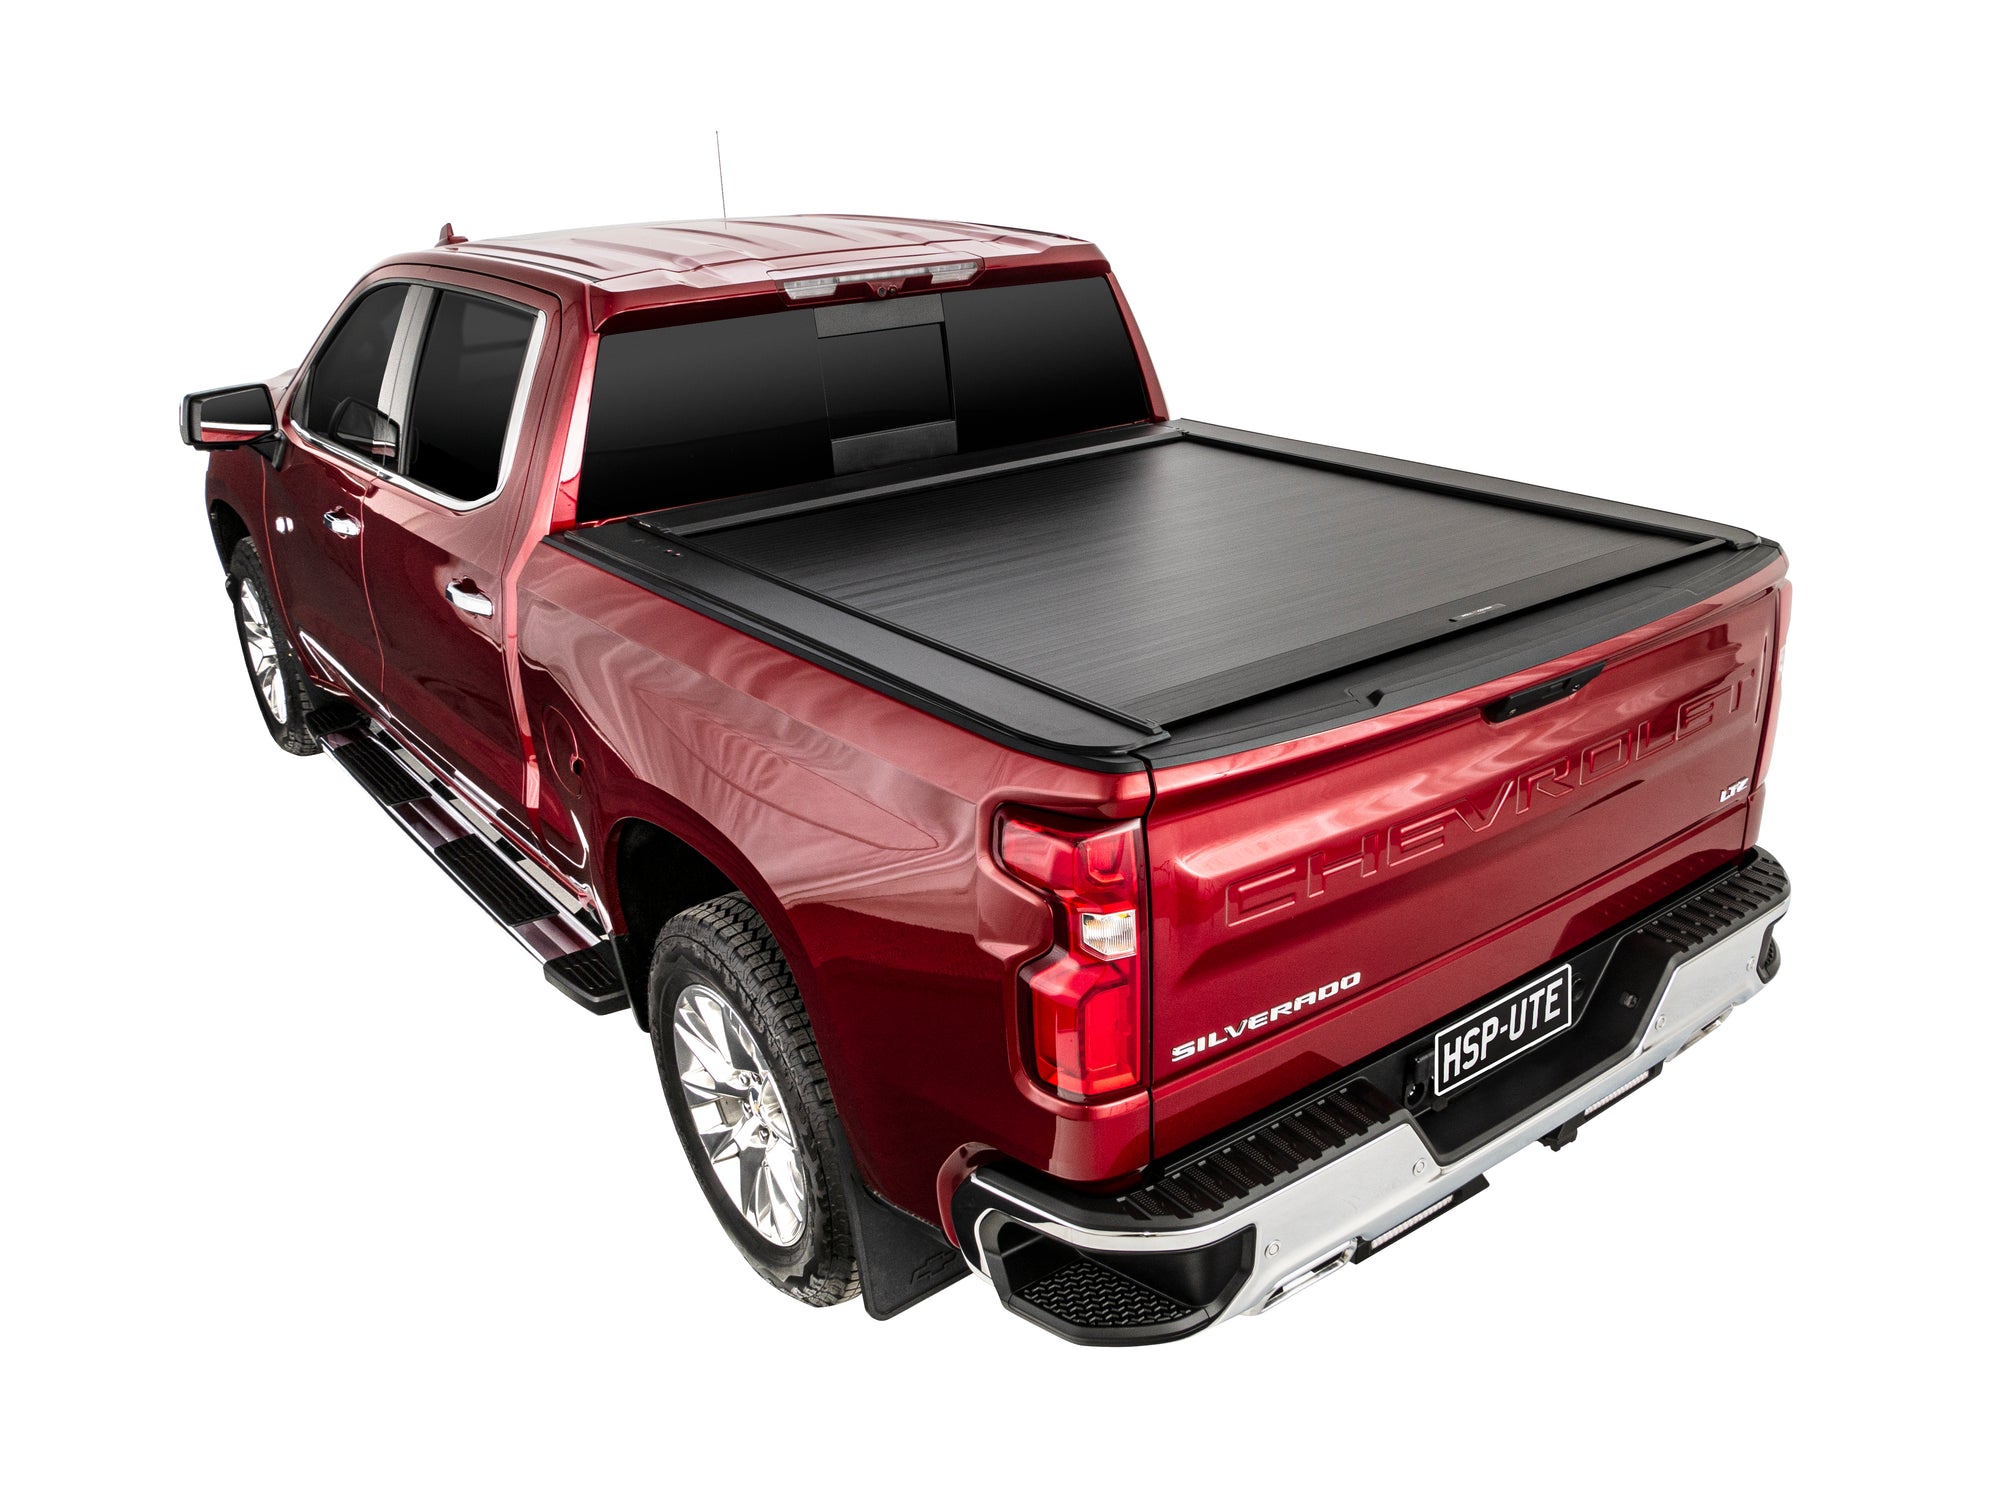 Chevrolet Silverado 1500 with short bed tub (1,776mm) - Roll R Cover Series 3 - Xtreme Ute Worx